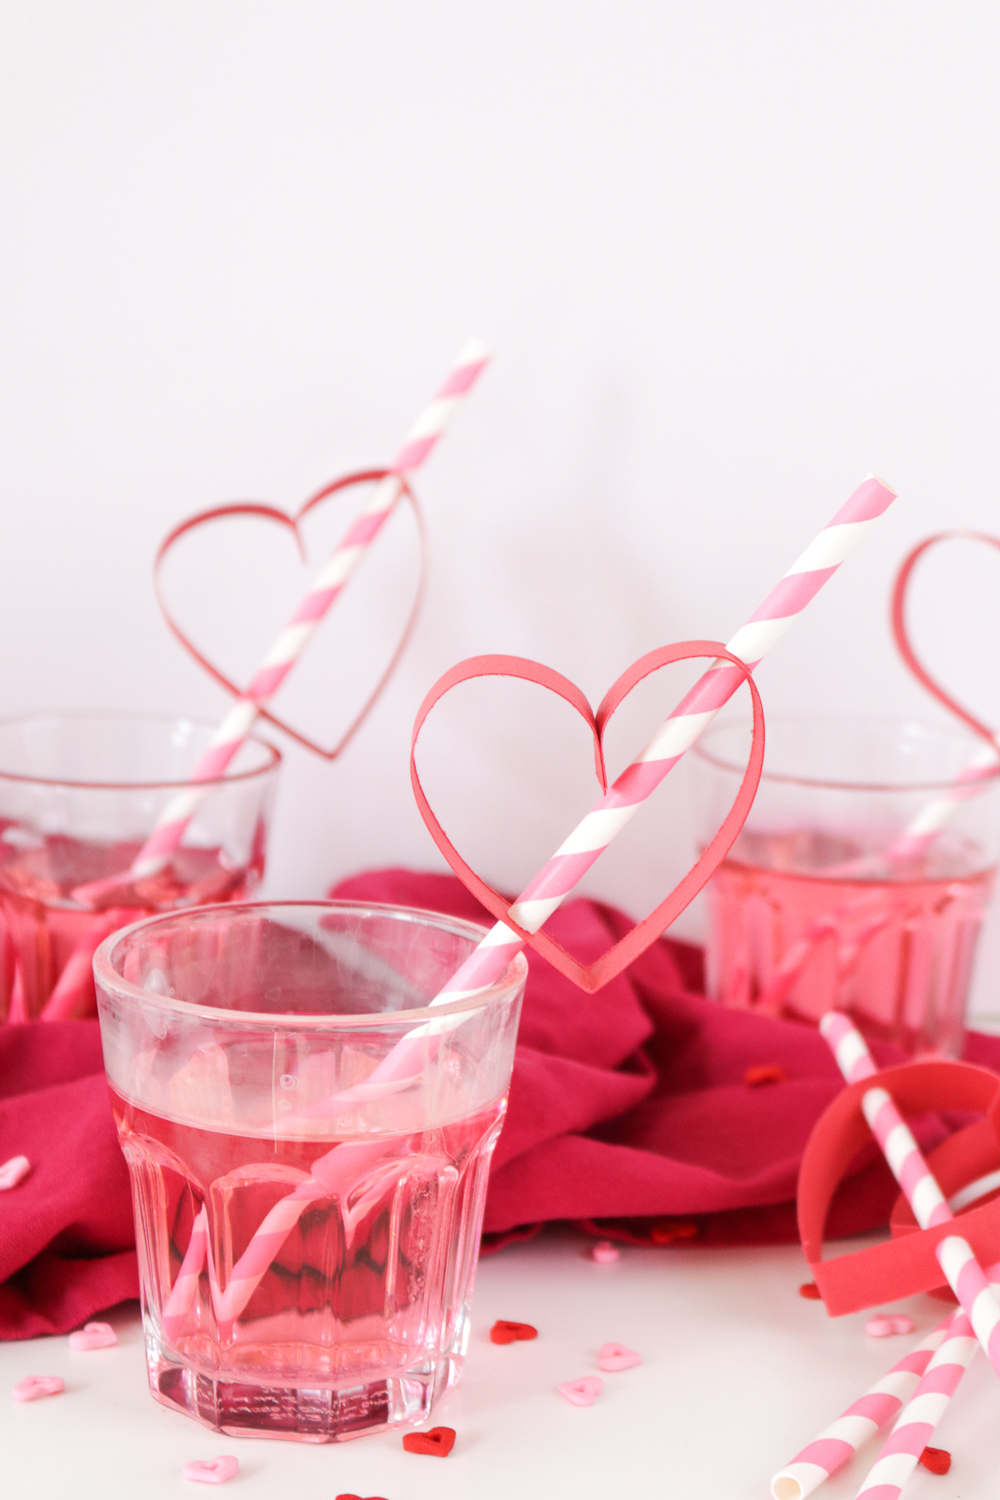 https://www.clubcrafted.com/wp-content/uploads/2017/01/valentines-day-diy-paper-heart-straws-3.jpg